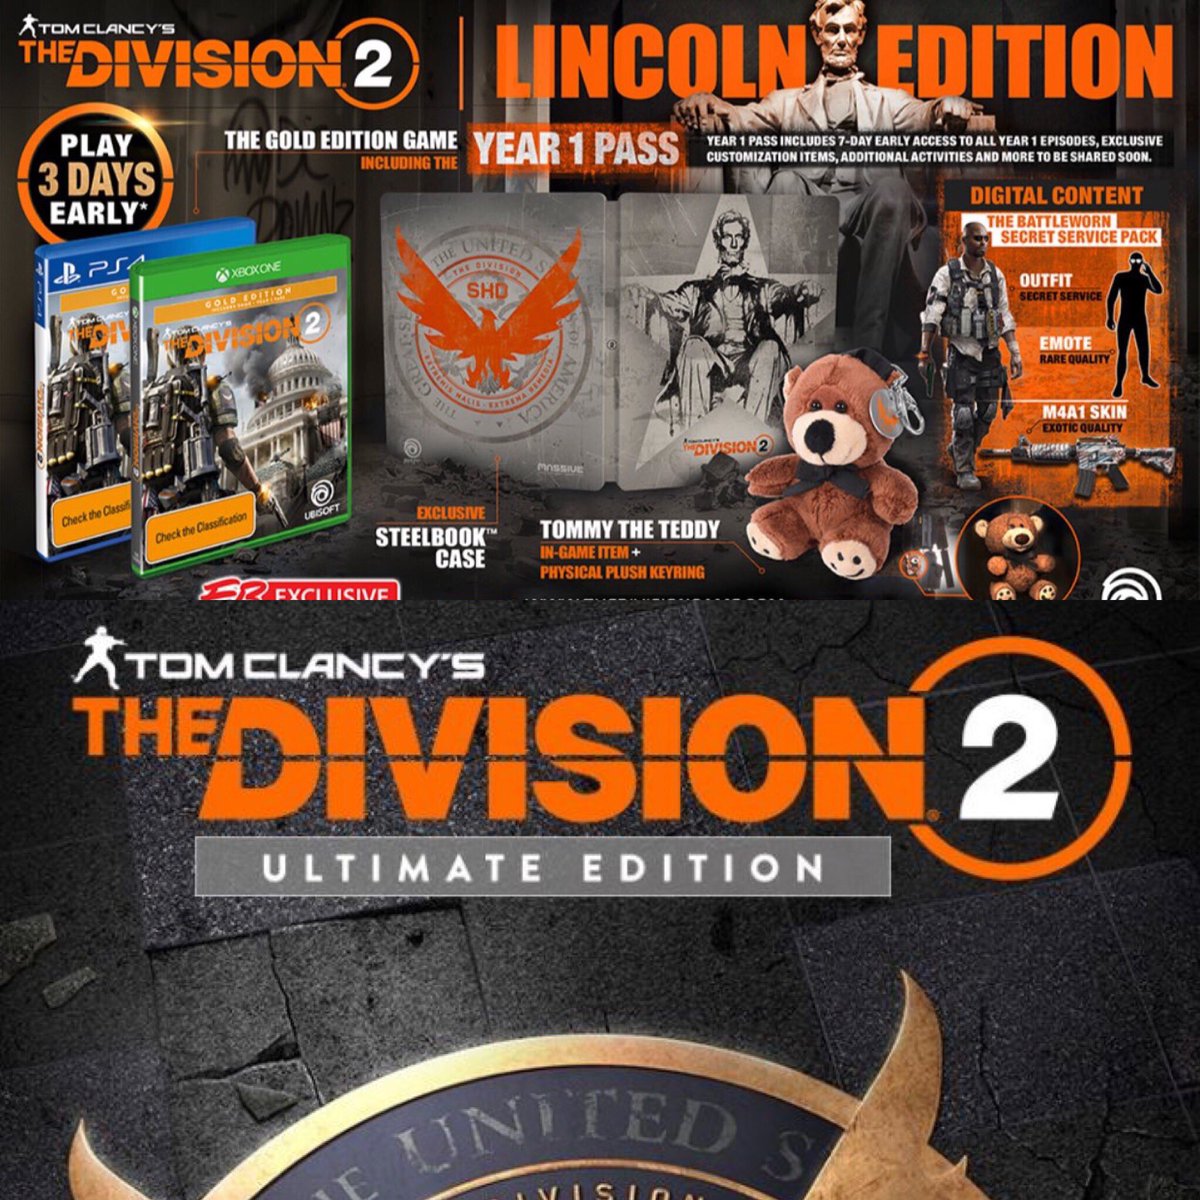 Thedivisionanz Lincoln Edition Exclusive To Eb Games Ultimate Edition Digital Only Year 1 Pass Included Phoenix Shield Edition Ubisoft Store Exclusive Dark Zone Edition Available Everywhere T Co Uzlkm5zjsg